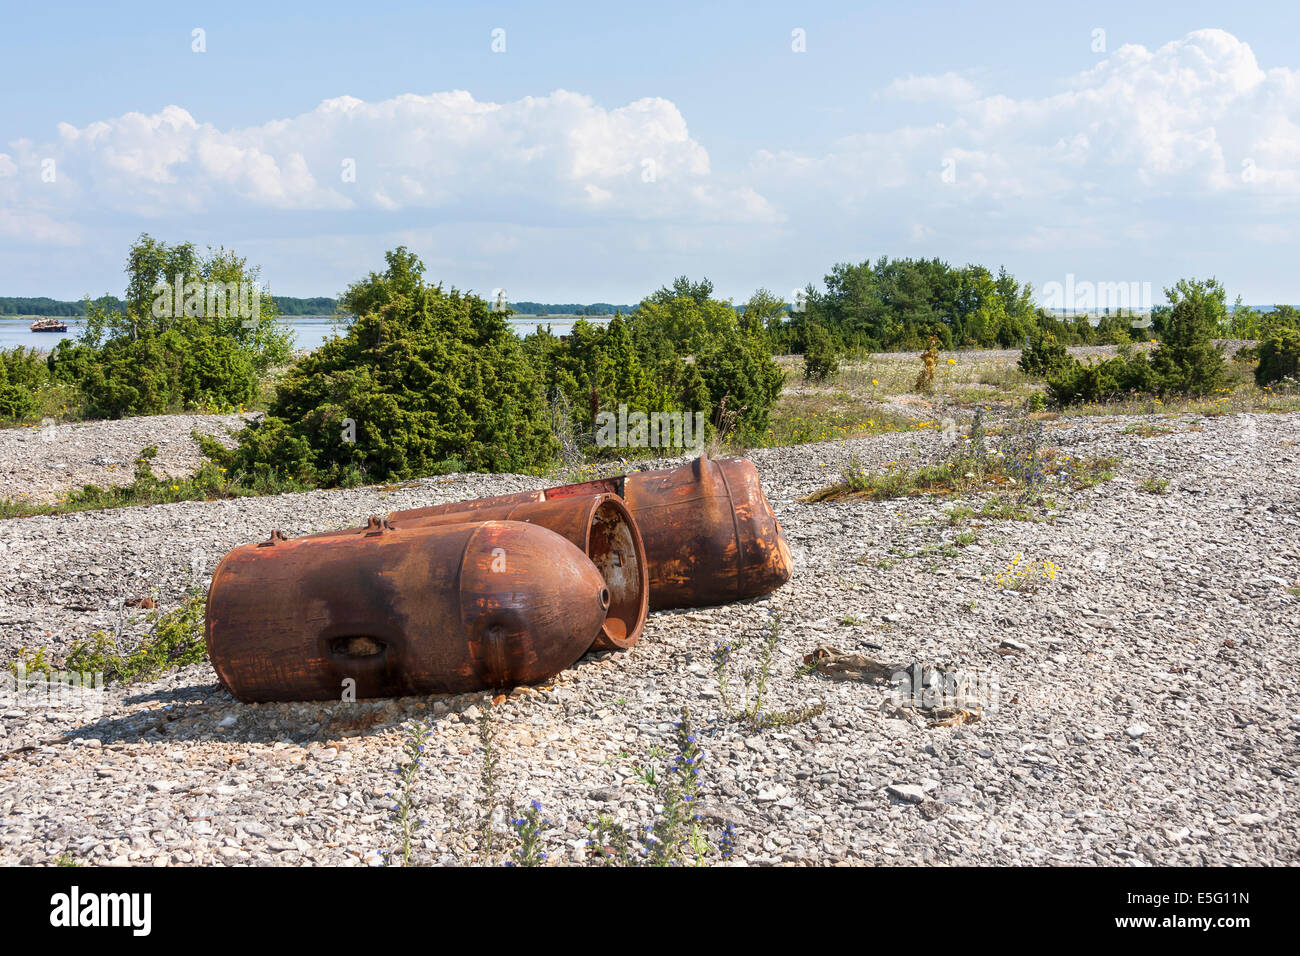 Several old rusty marine mines on the ground Stock Photo